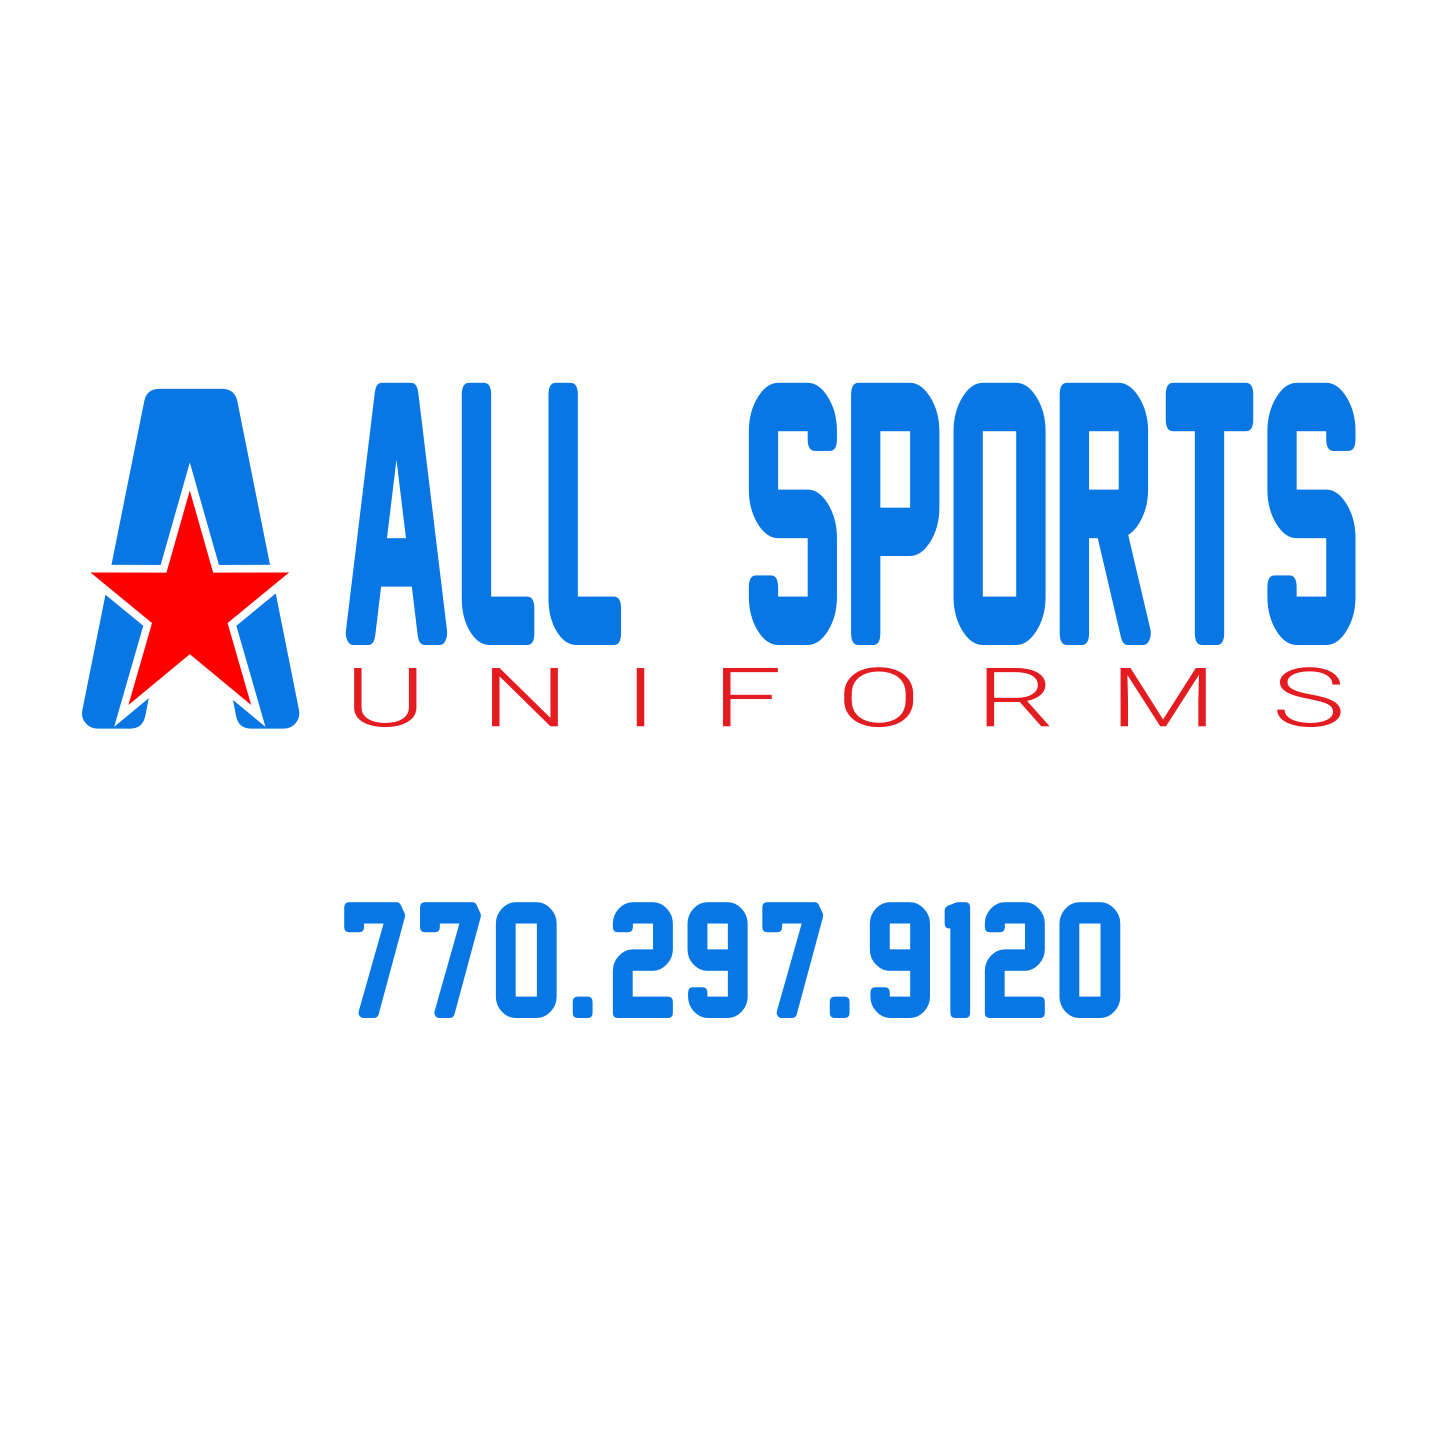 All Sports Uniforms